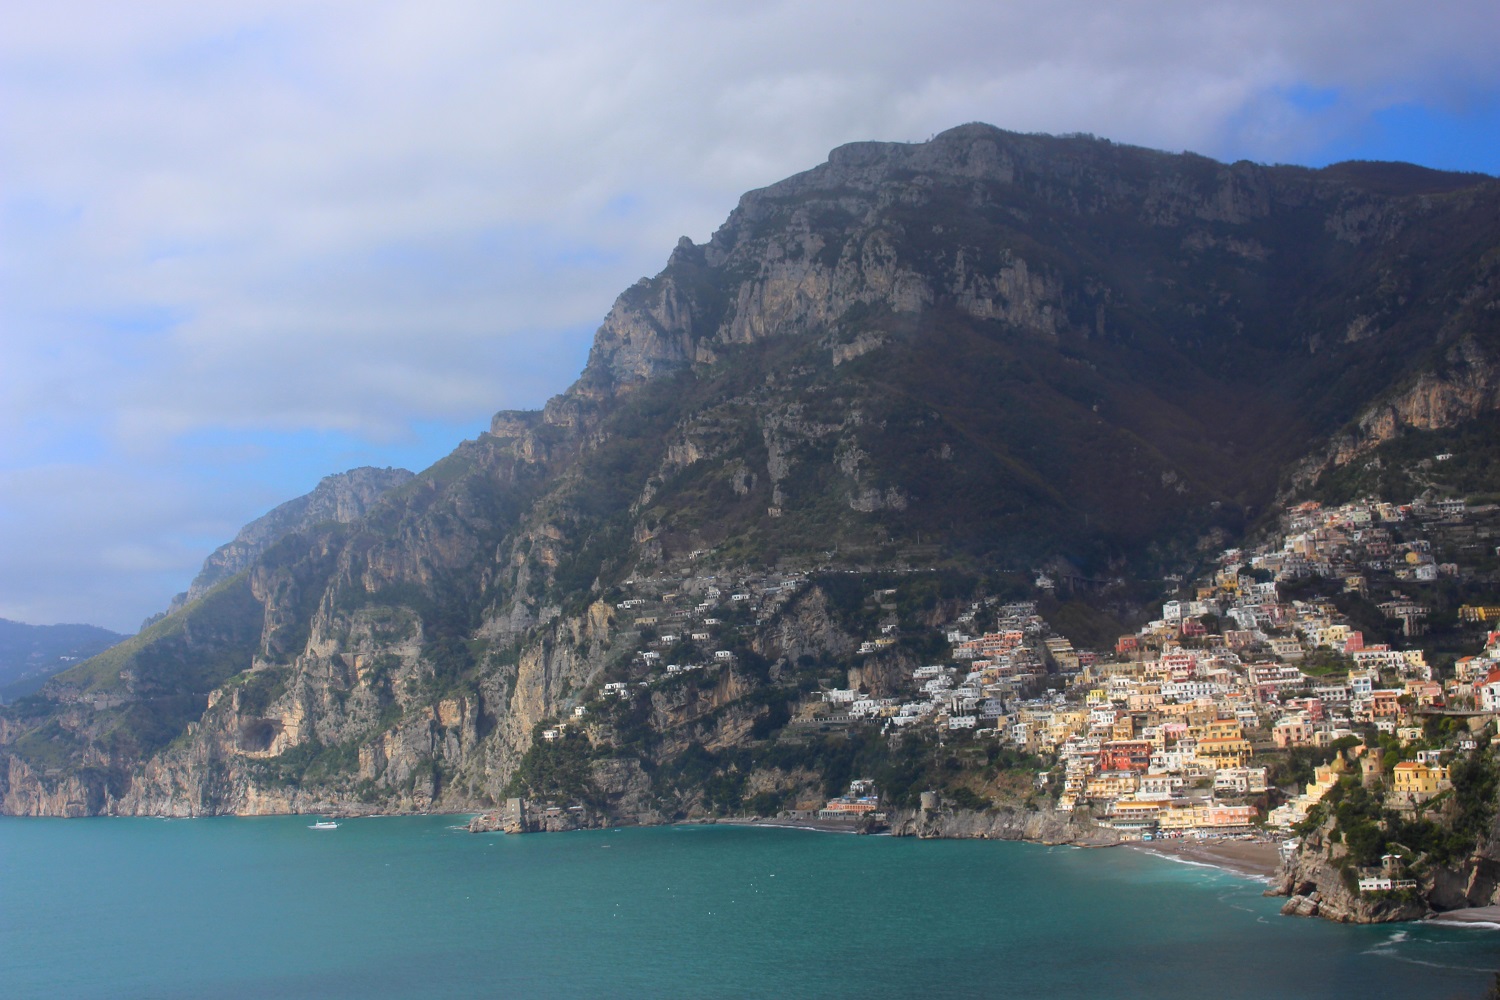 Positano in the distance 